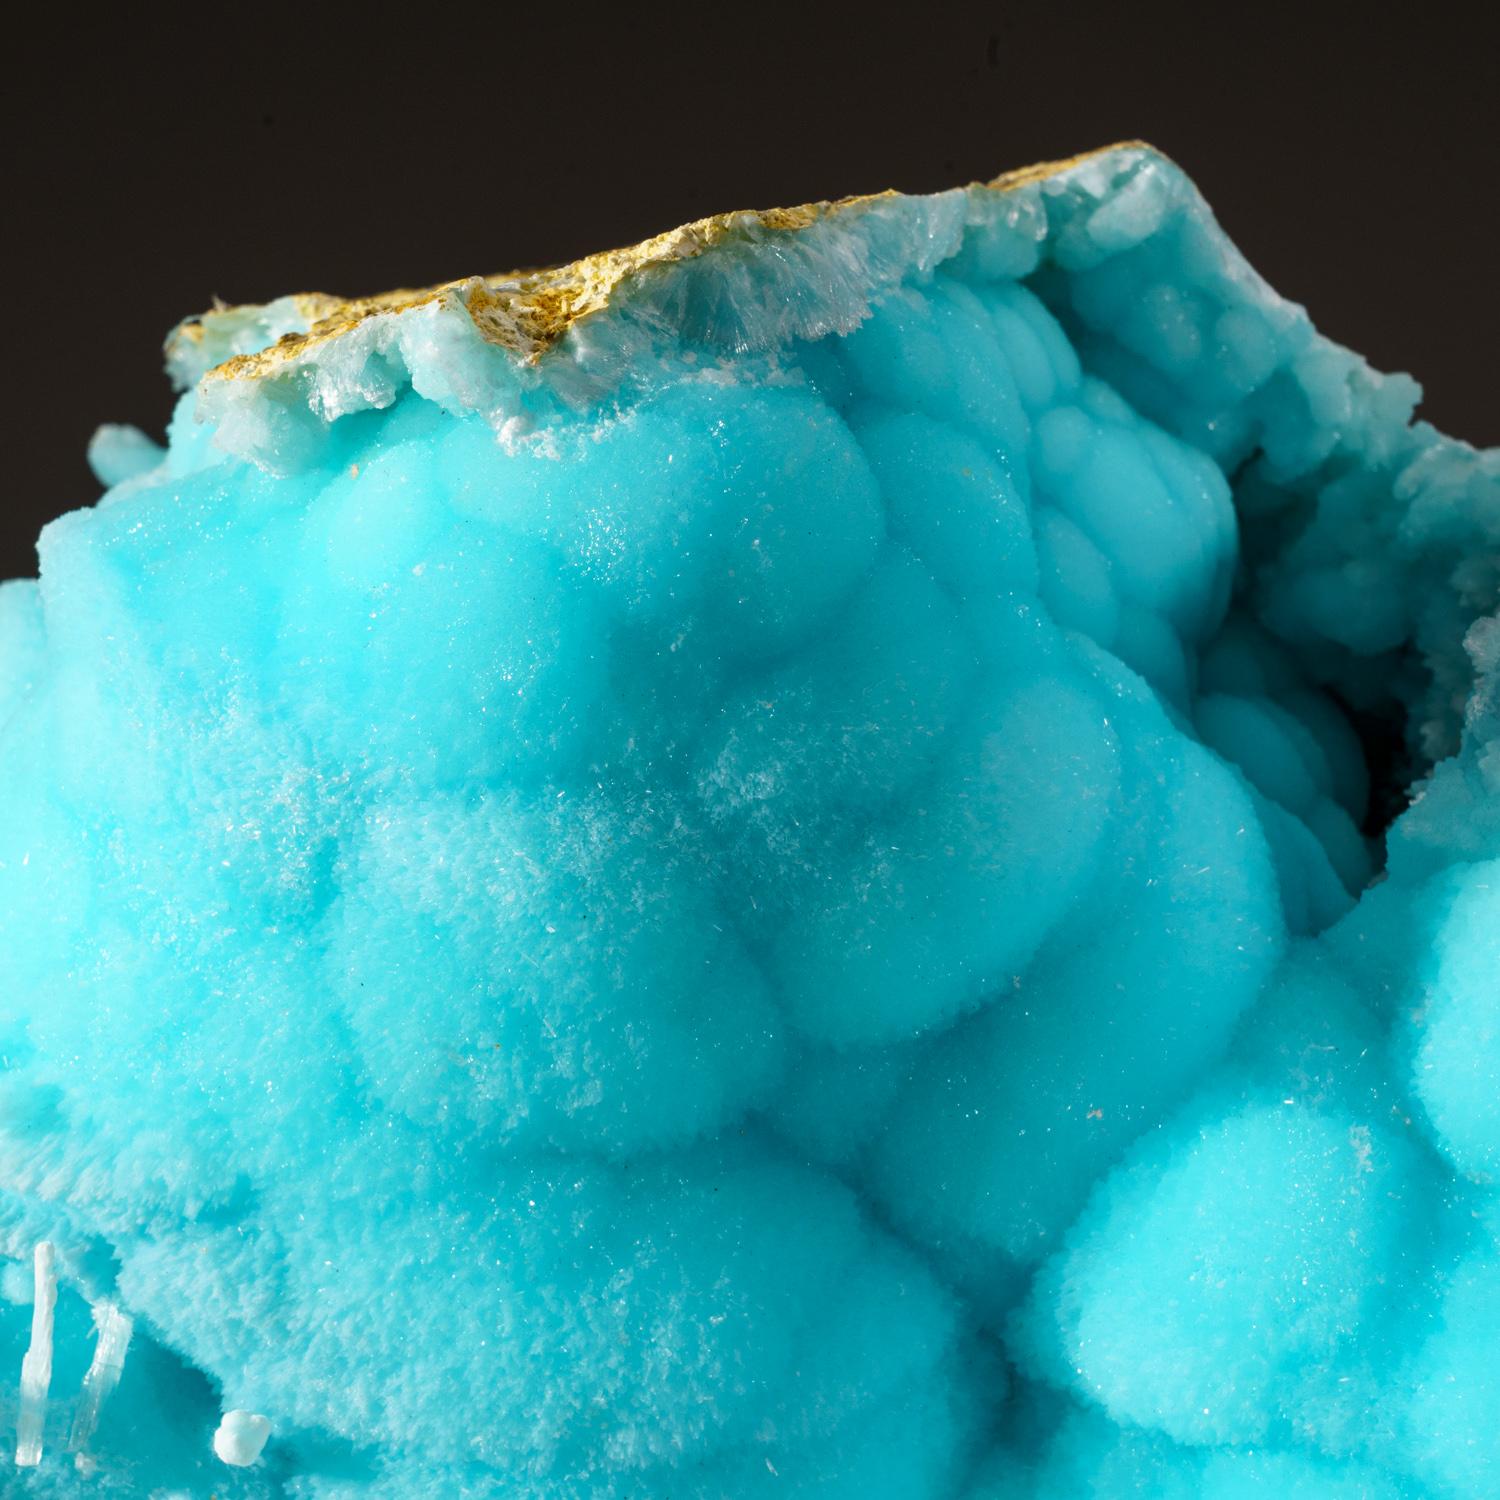 Large botyroidal formation of powder blue translucent hemimorphite on matrix. The hemimorphite has a scintillating surface composed of microscopic crystal faces giving a sparkling luster.

 

Weight: 11.6 lbs, Size: 10 x 5 x 6 inches